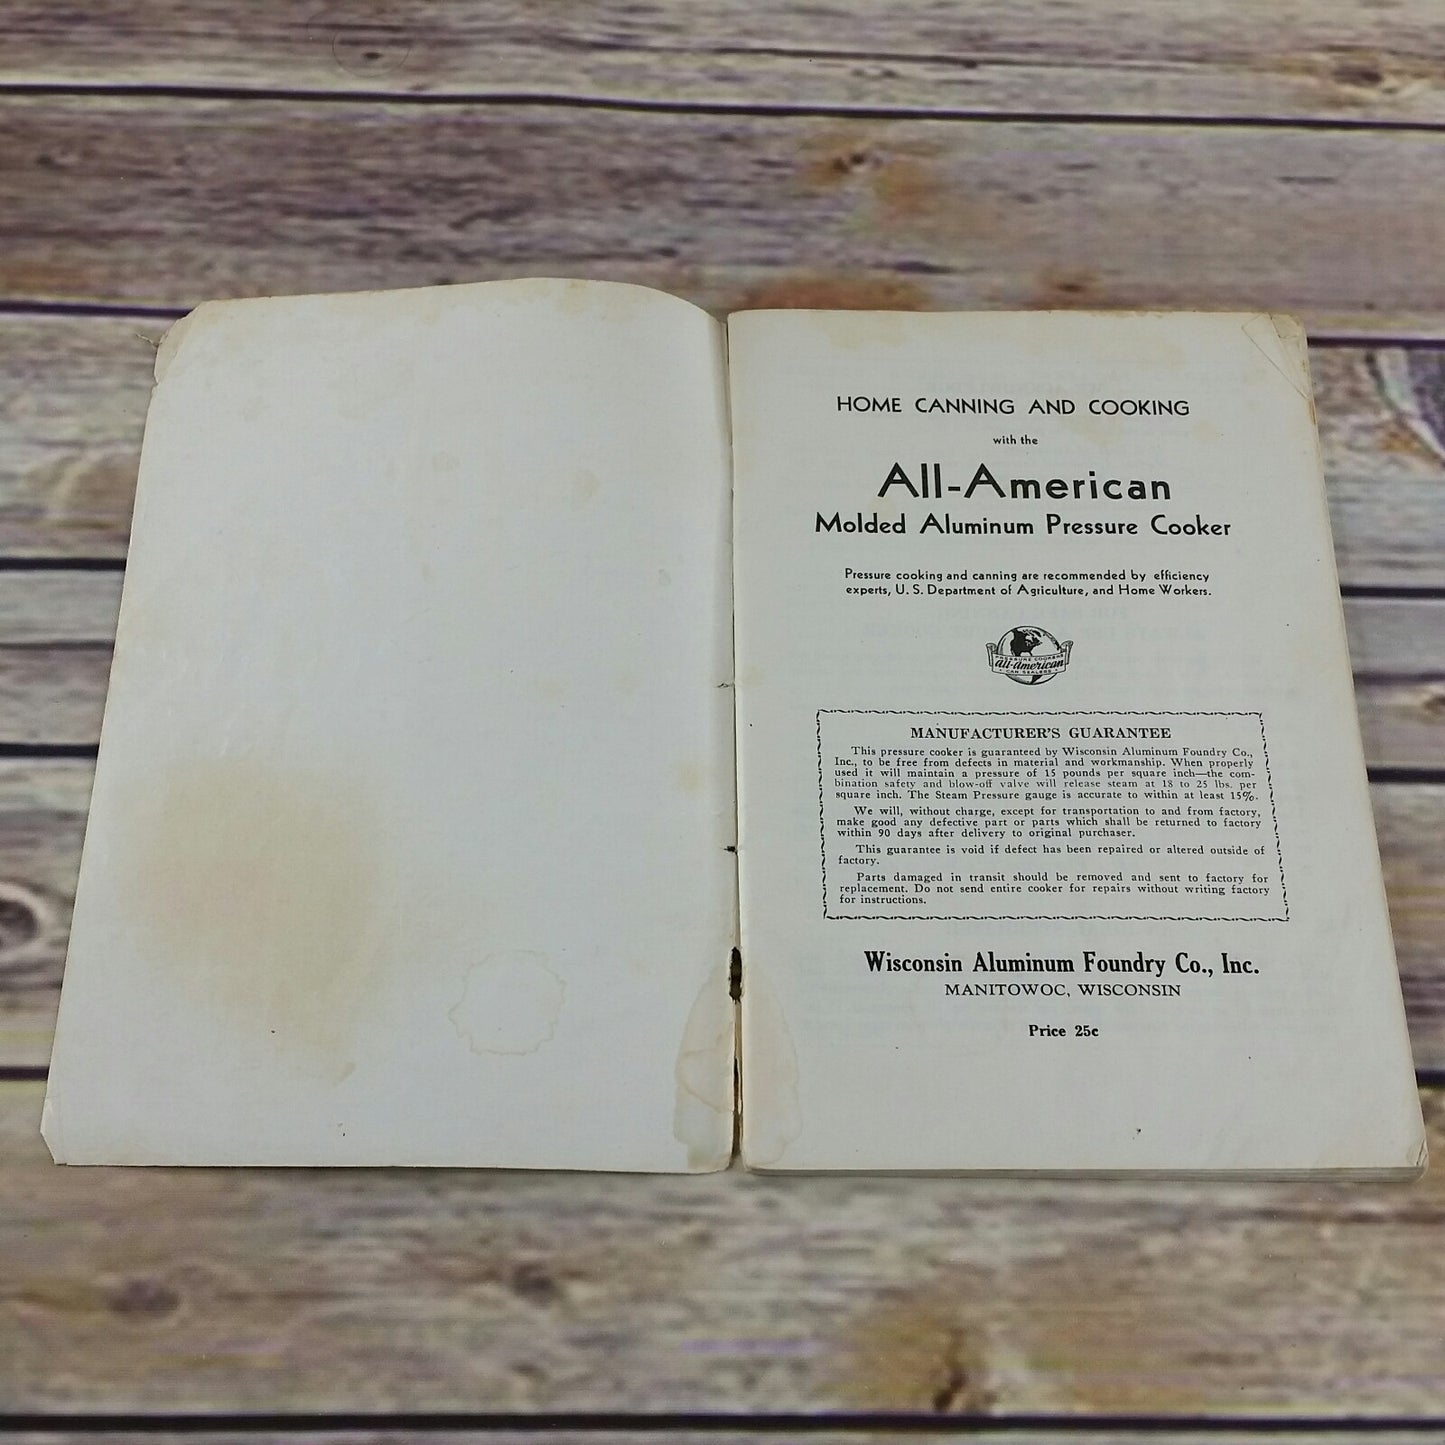 Vintage Canning Cookbook Recipes Wisconsin Aluminum Foundry Co The All American Way Booklet Food Preservation - At Grandma's Table